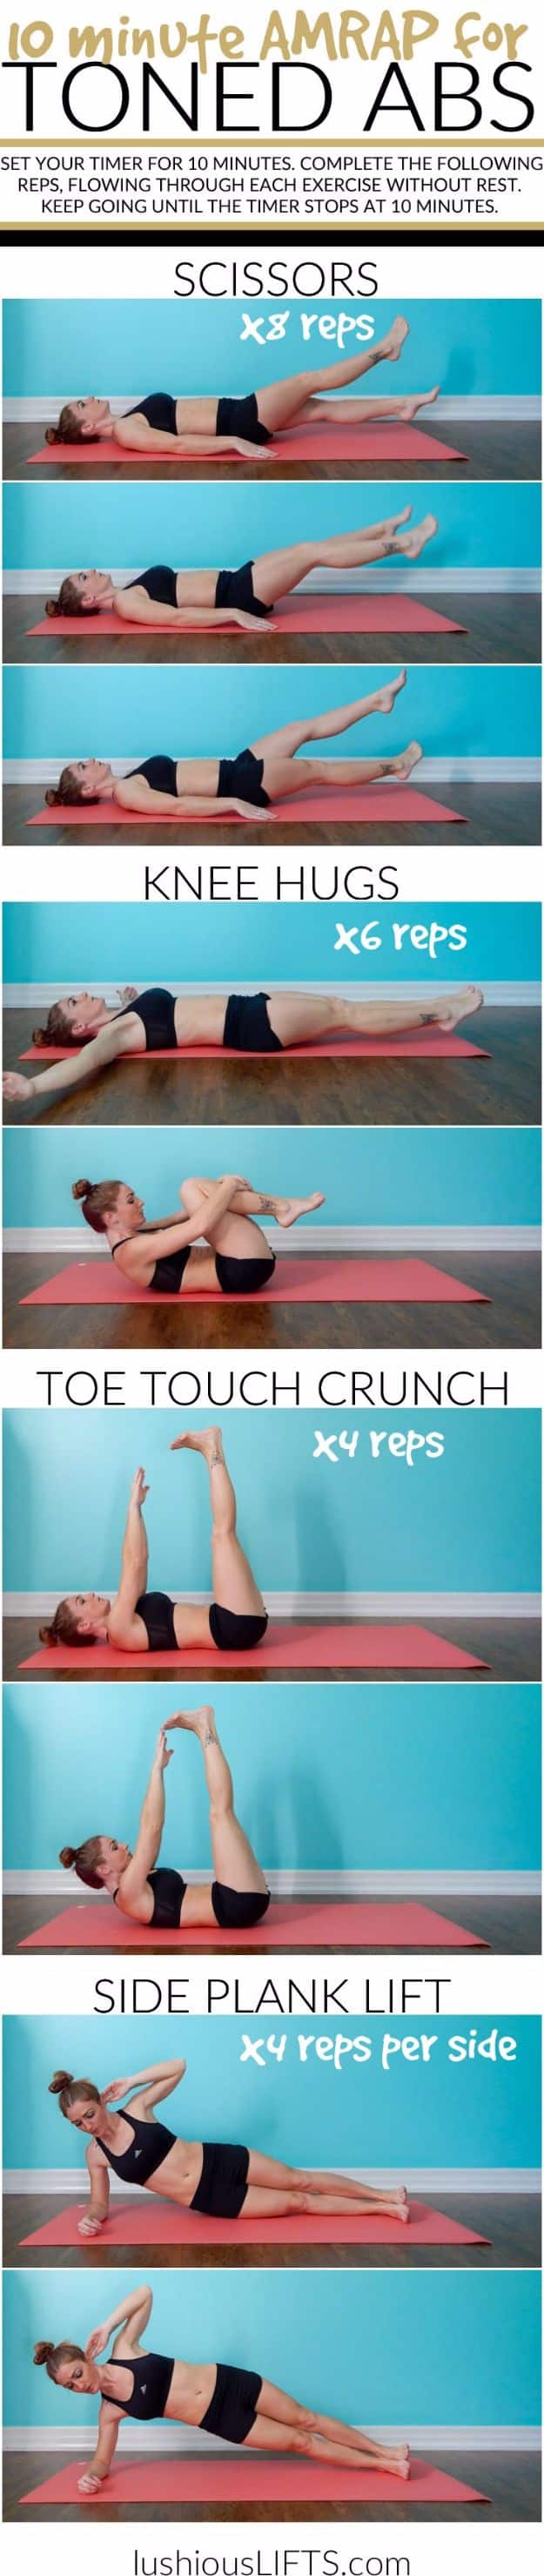 30 Ten Minute Workouts To Help Get In Shape Without Going to The Gym